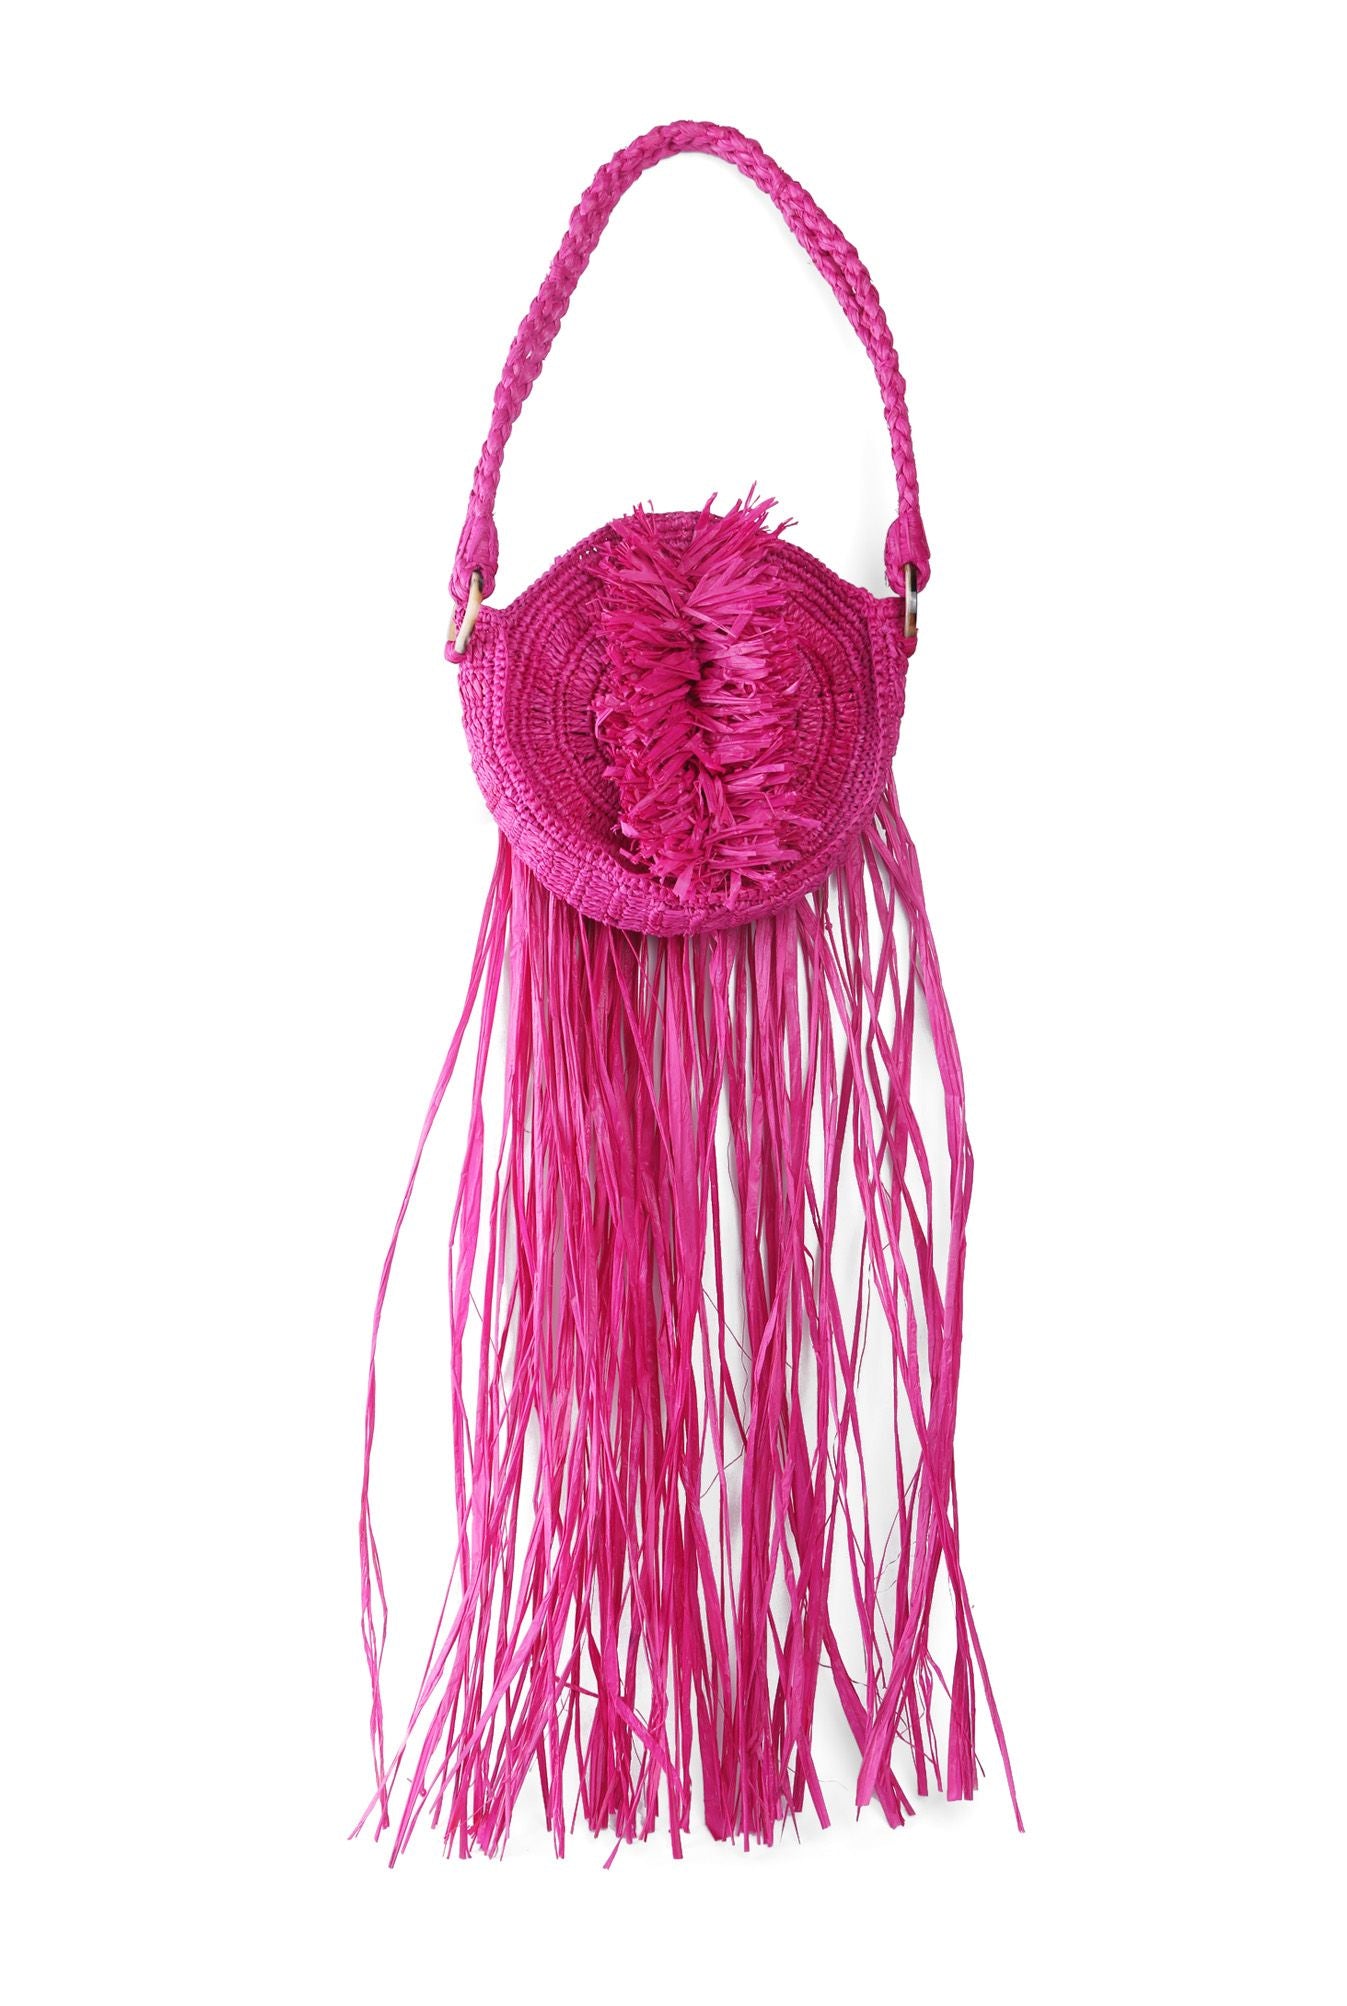 4 Pieces Fashion Purse With Long Fringes And Chain Fuchsia